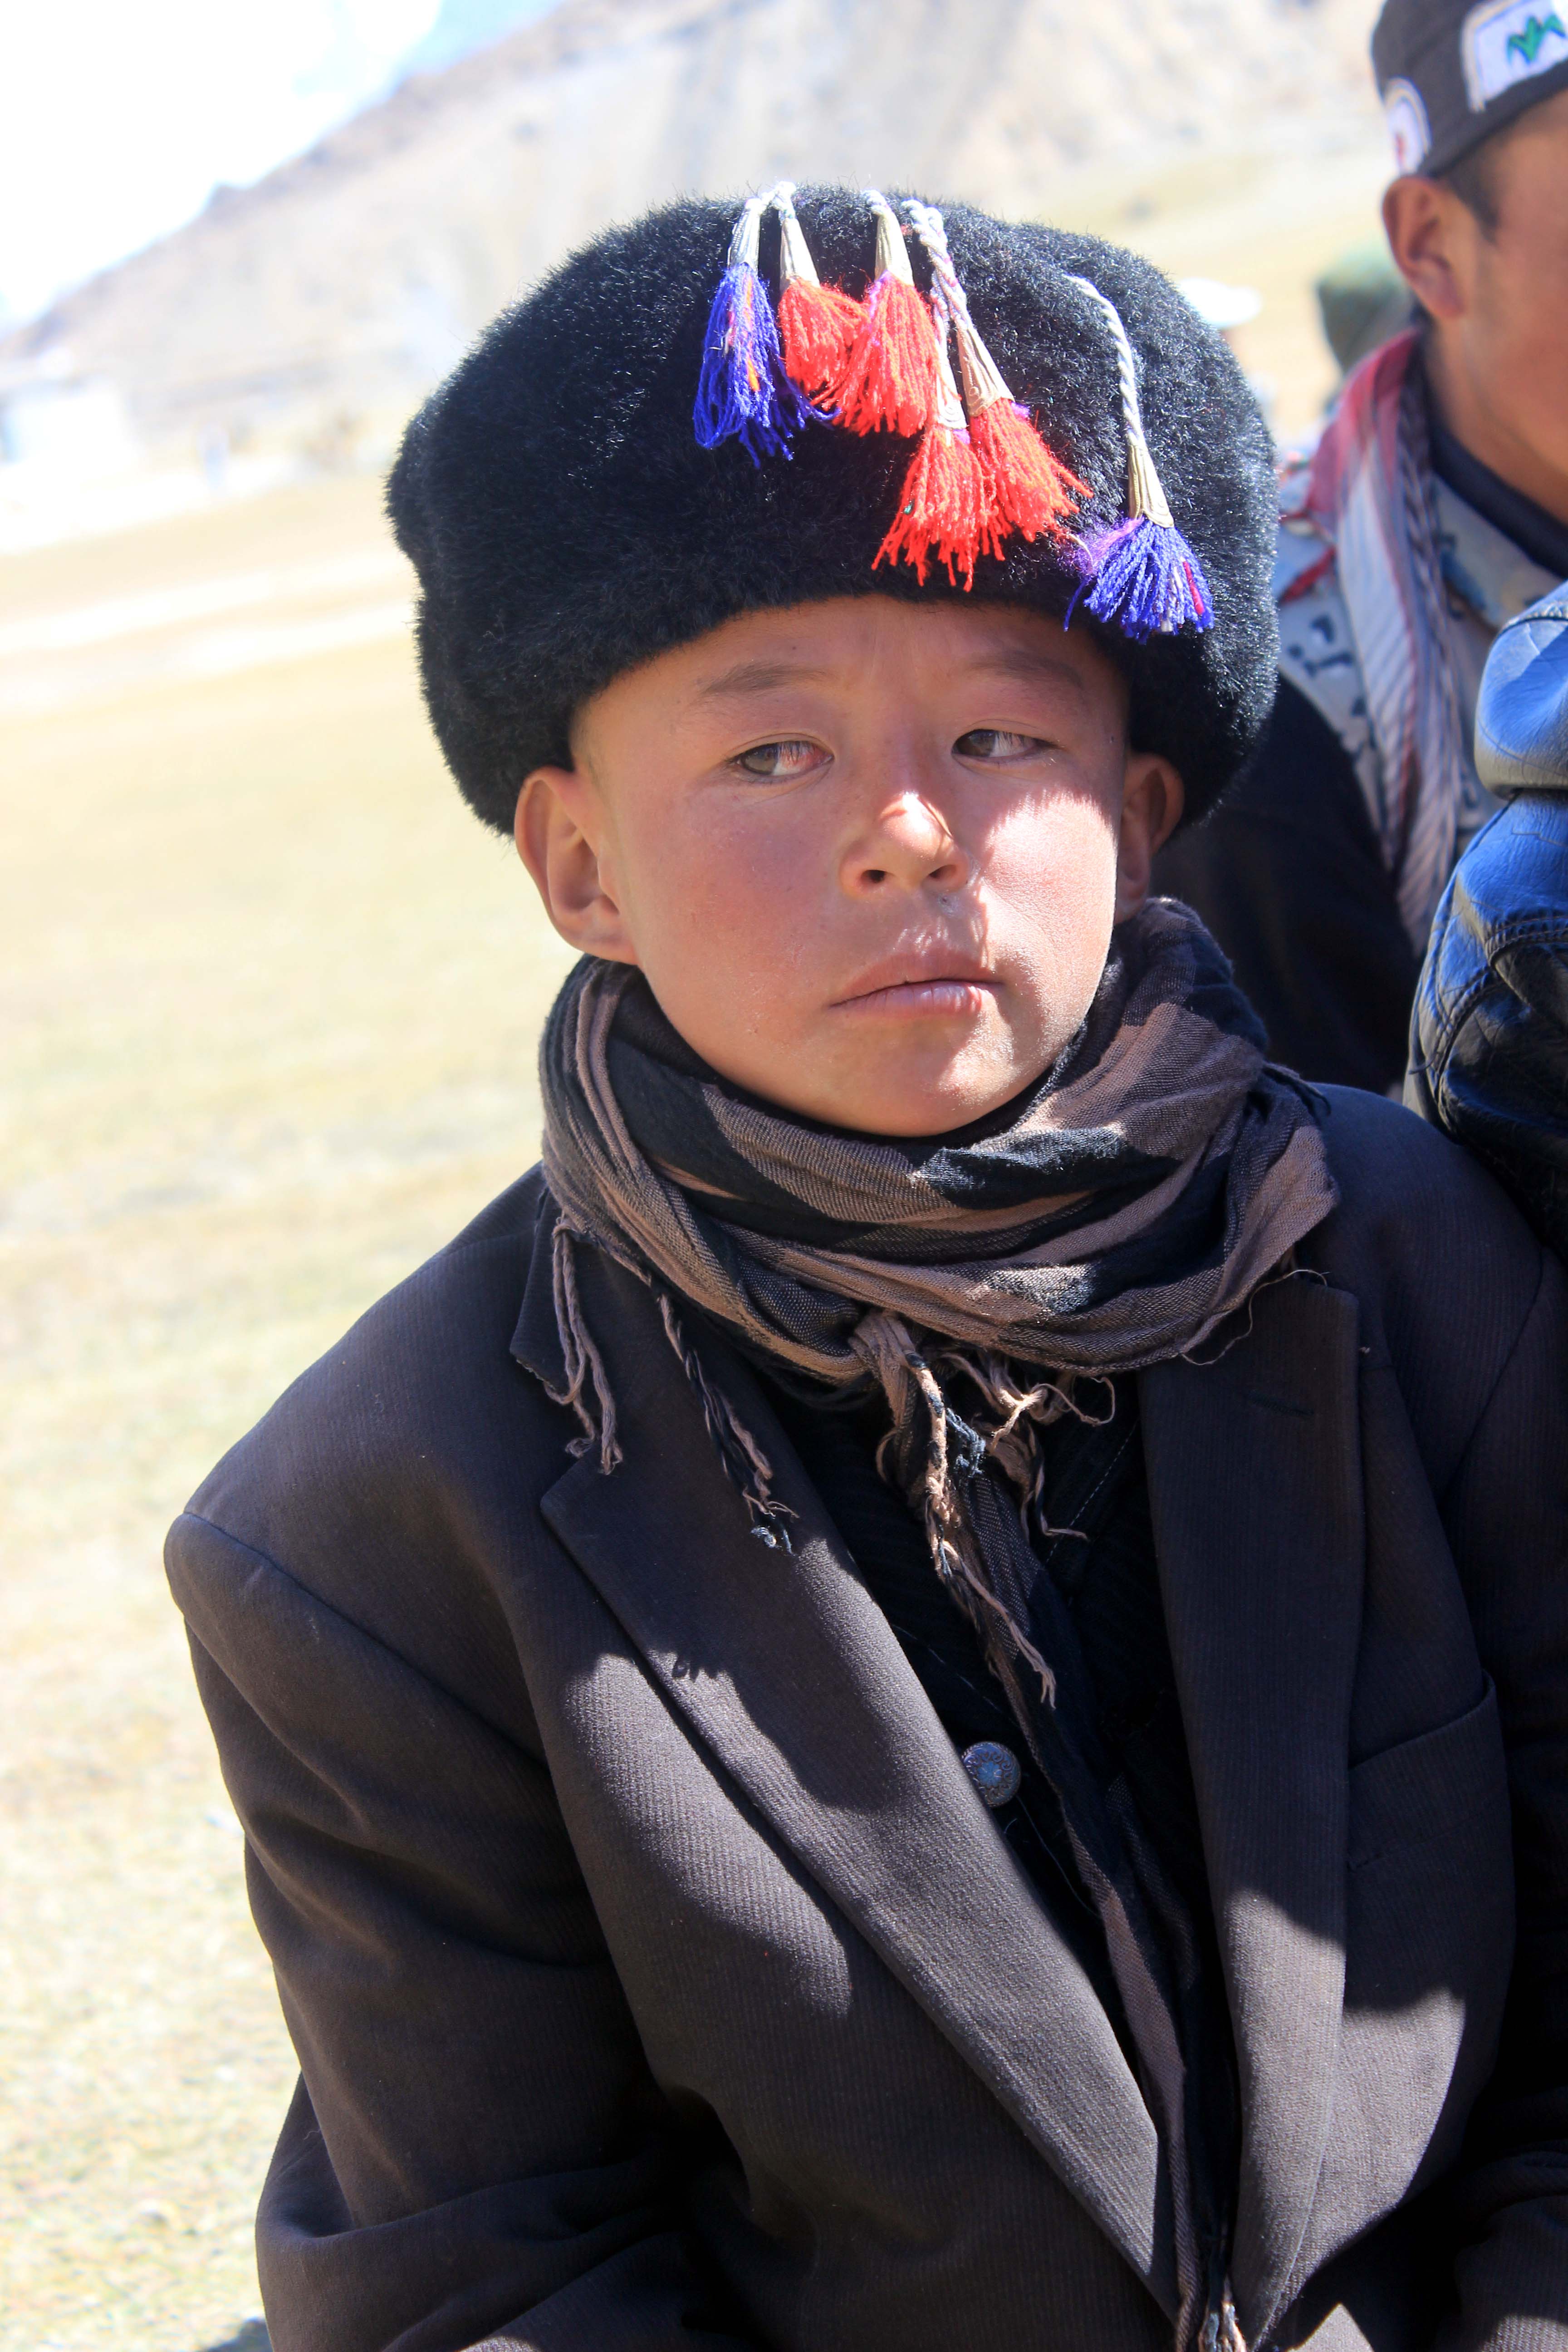 A Kirghiz child who came to attend the festival with his parents 